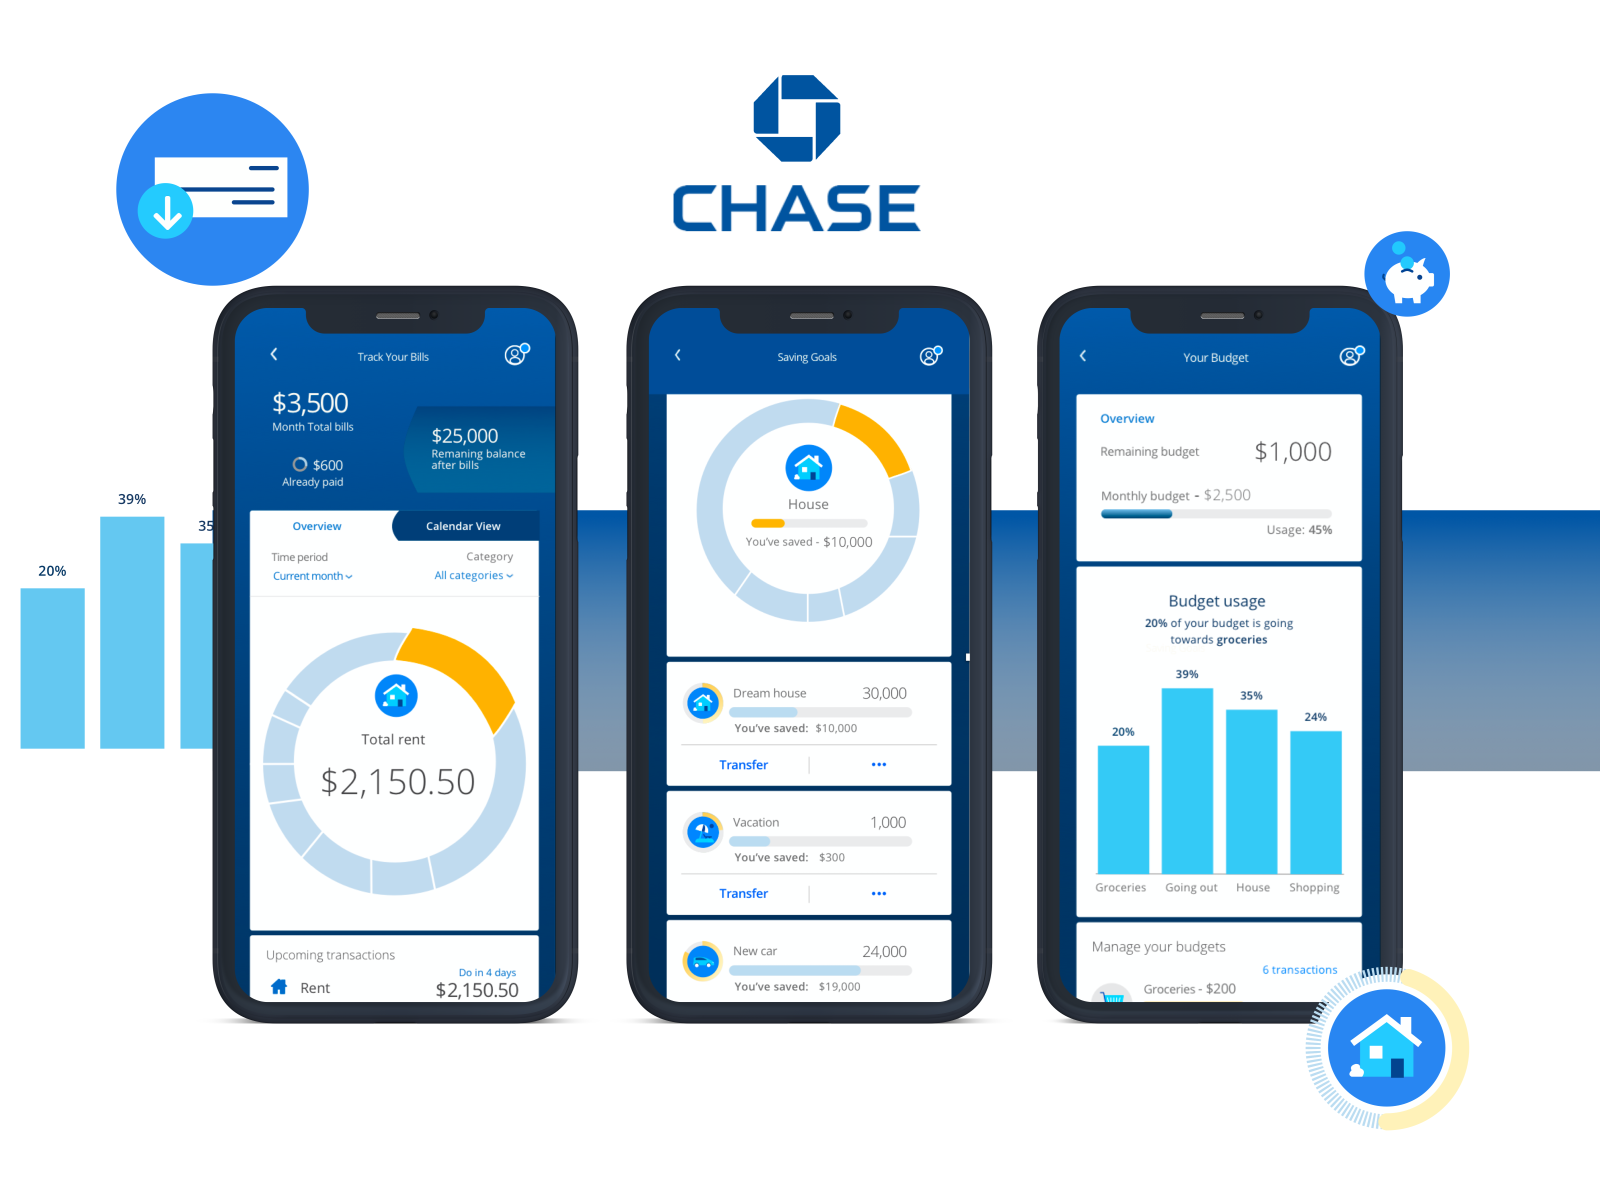 Adding Three New Features To The Chase Mobile Application By Shira Davis On Dribbble